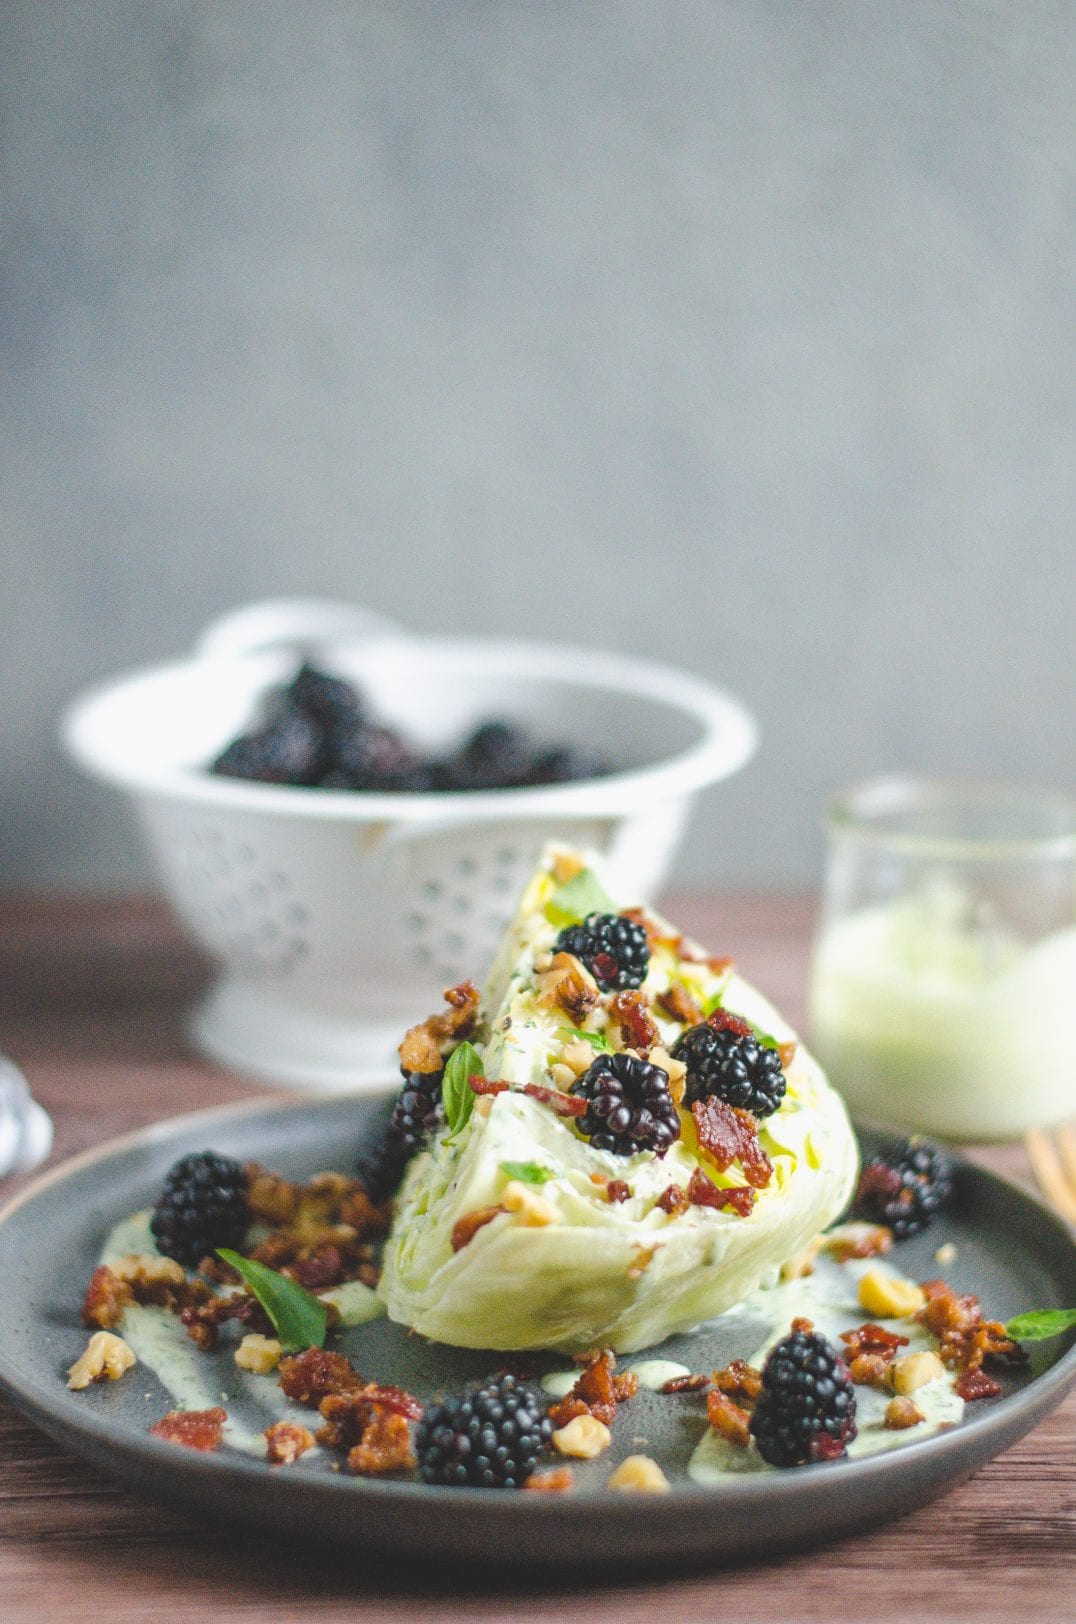 Wedge Salad with Candied Bacon, Walnuts, Blackberries & Basil Ranch